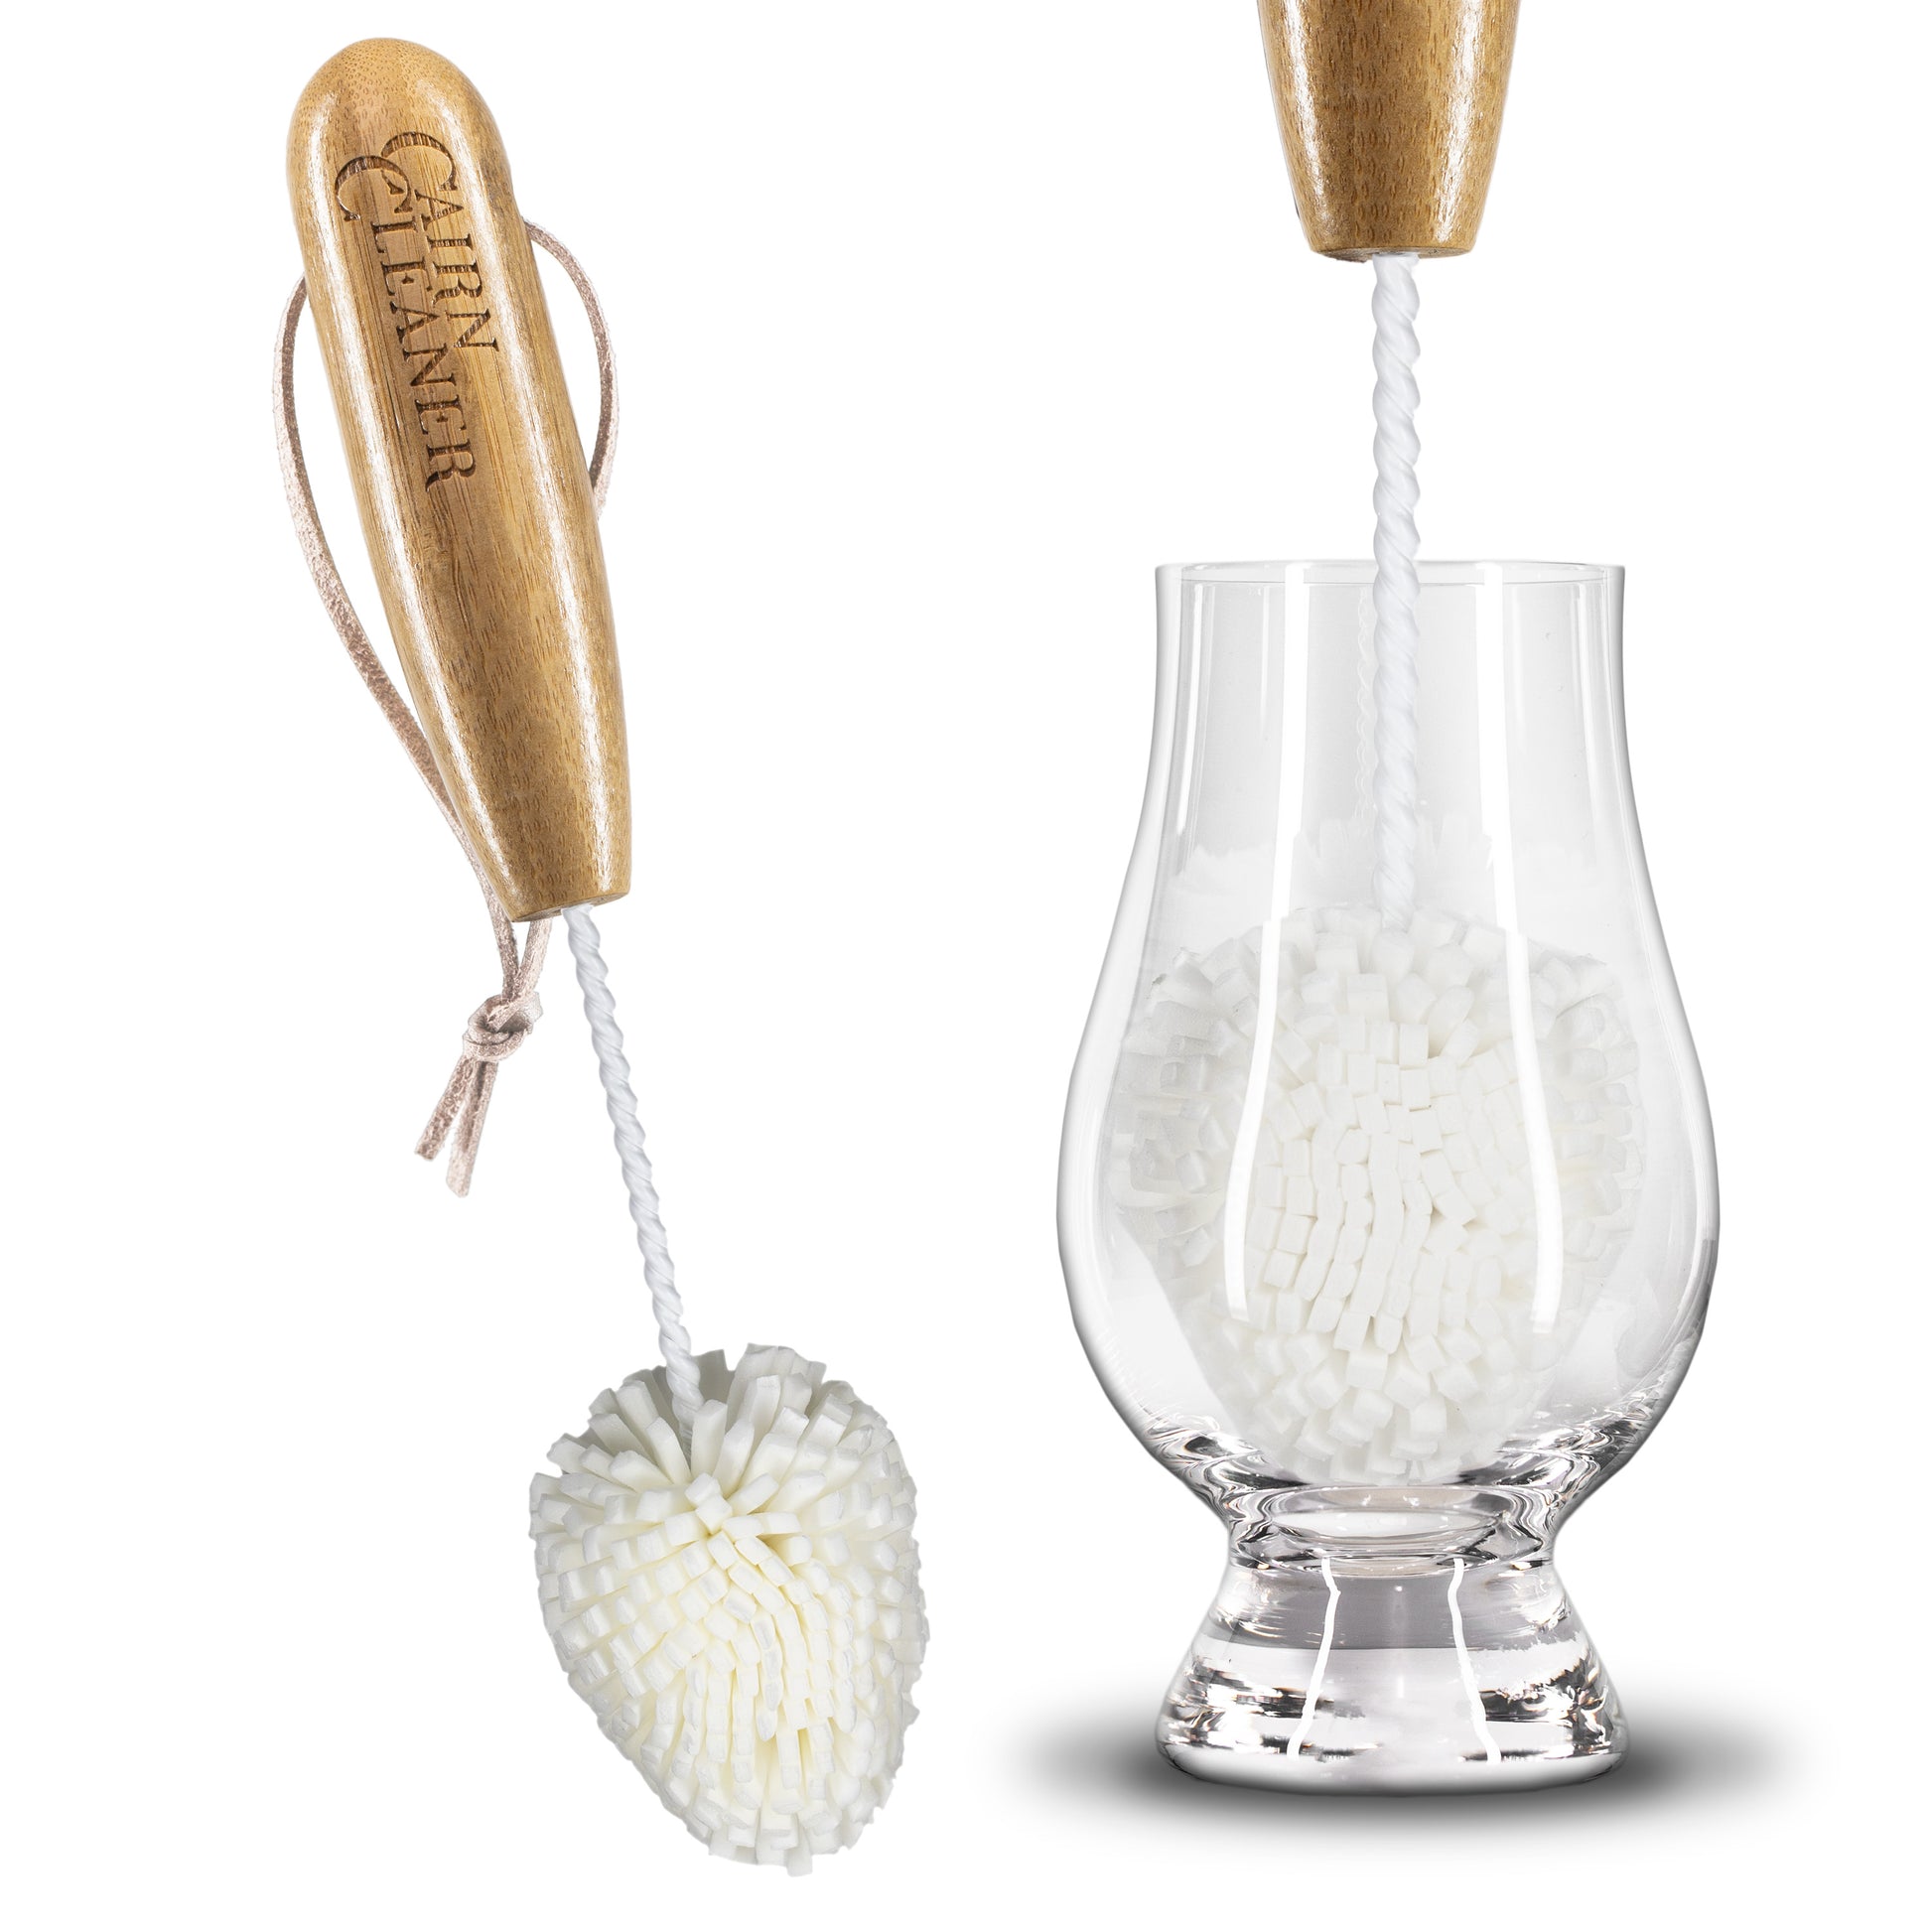 CairnCleaner Whiskey Tasting Glass Brush - Also for wine glasses and champagne flutes, Natural Bamboo